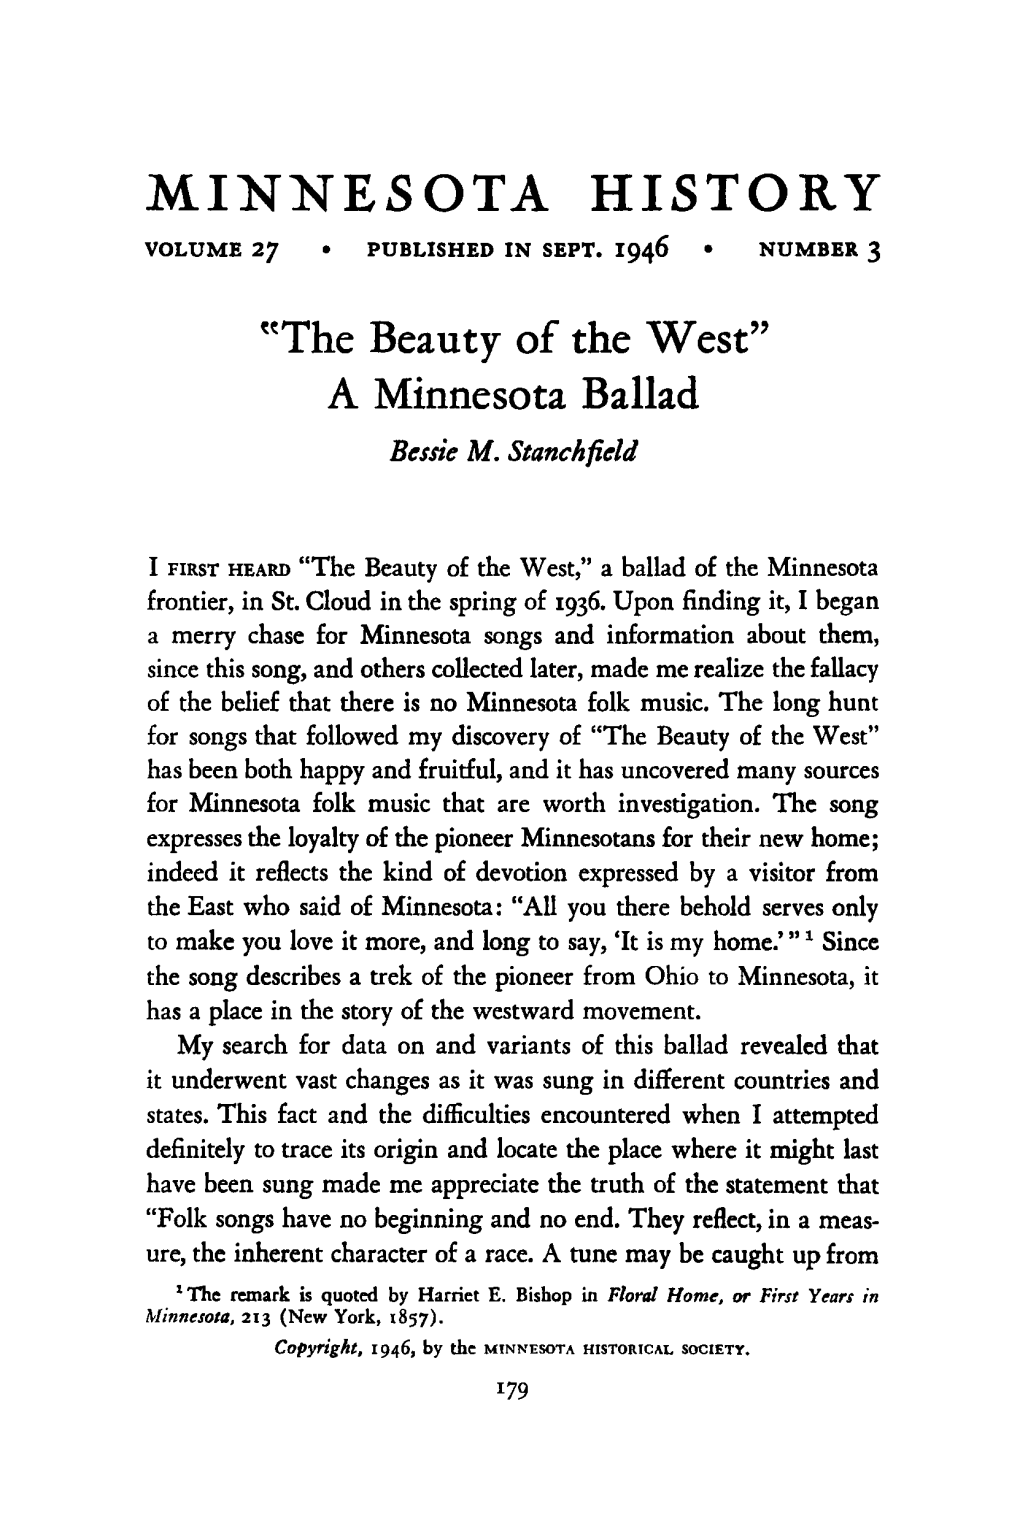 The Beauty of the West," a Minnesota Ballad [By] Bessie M. Stanchfield